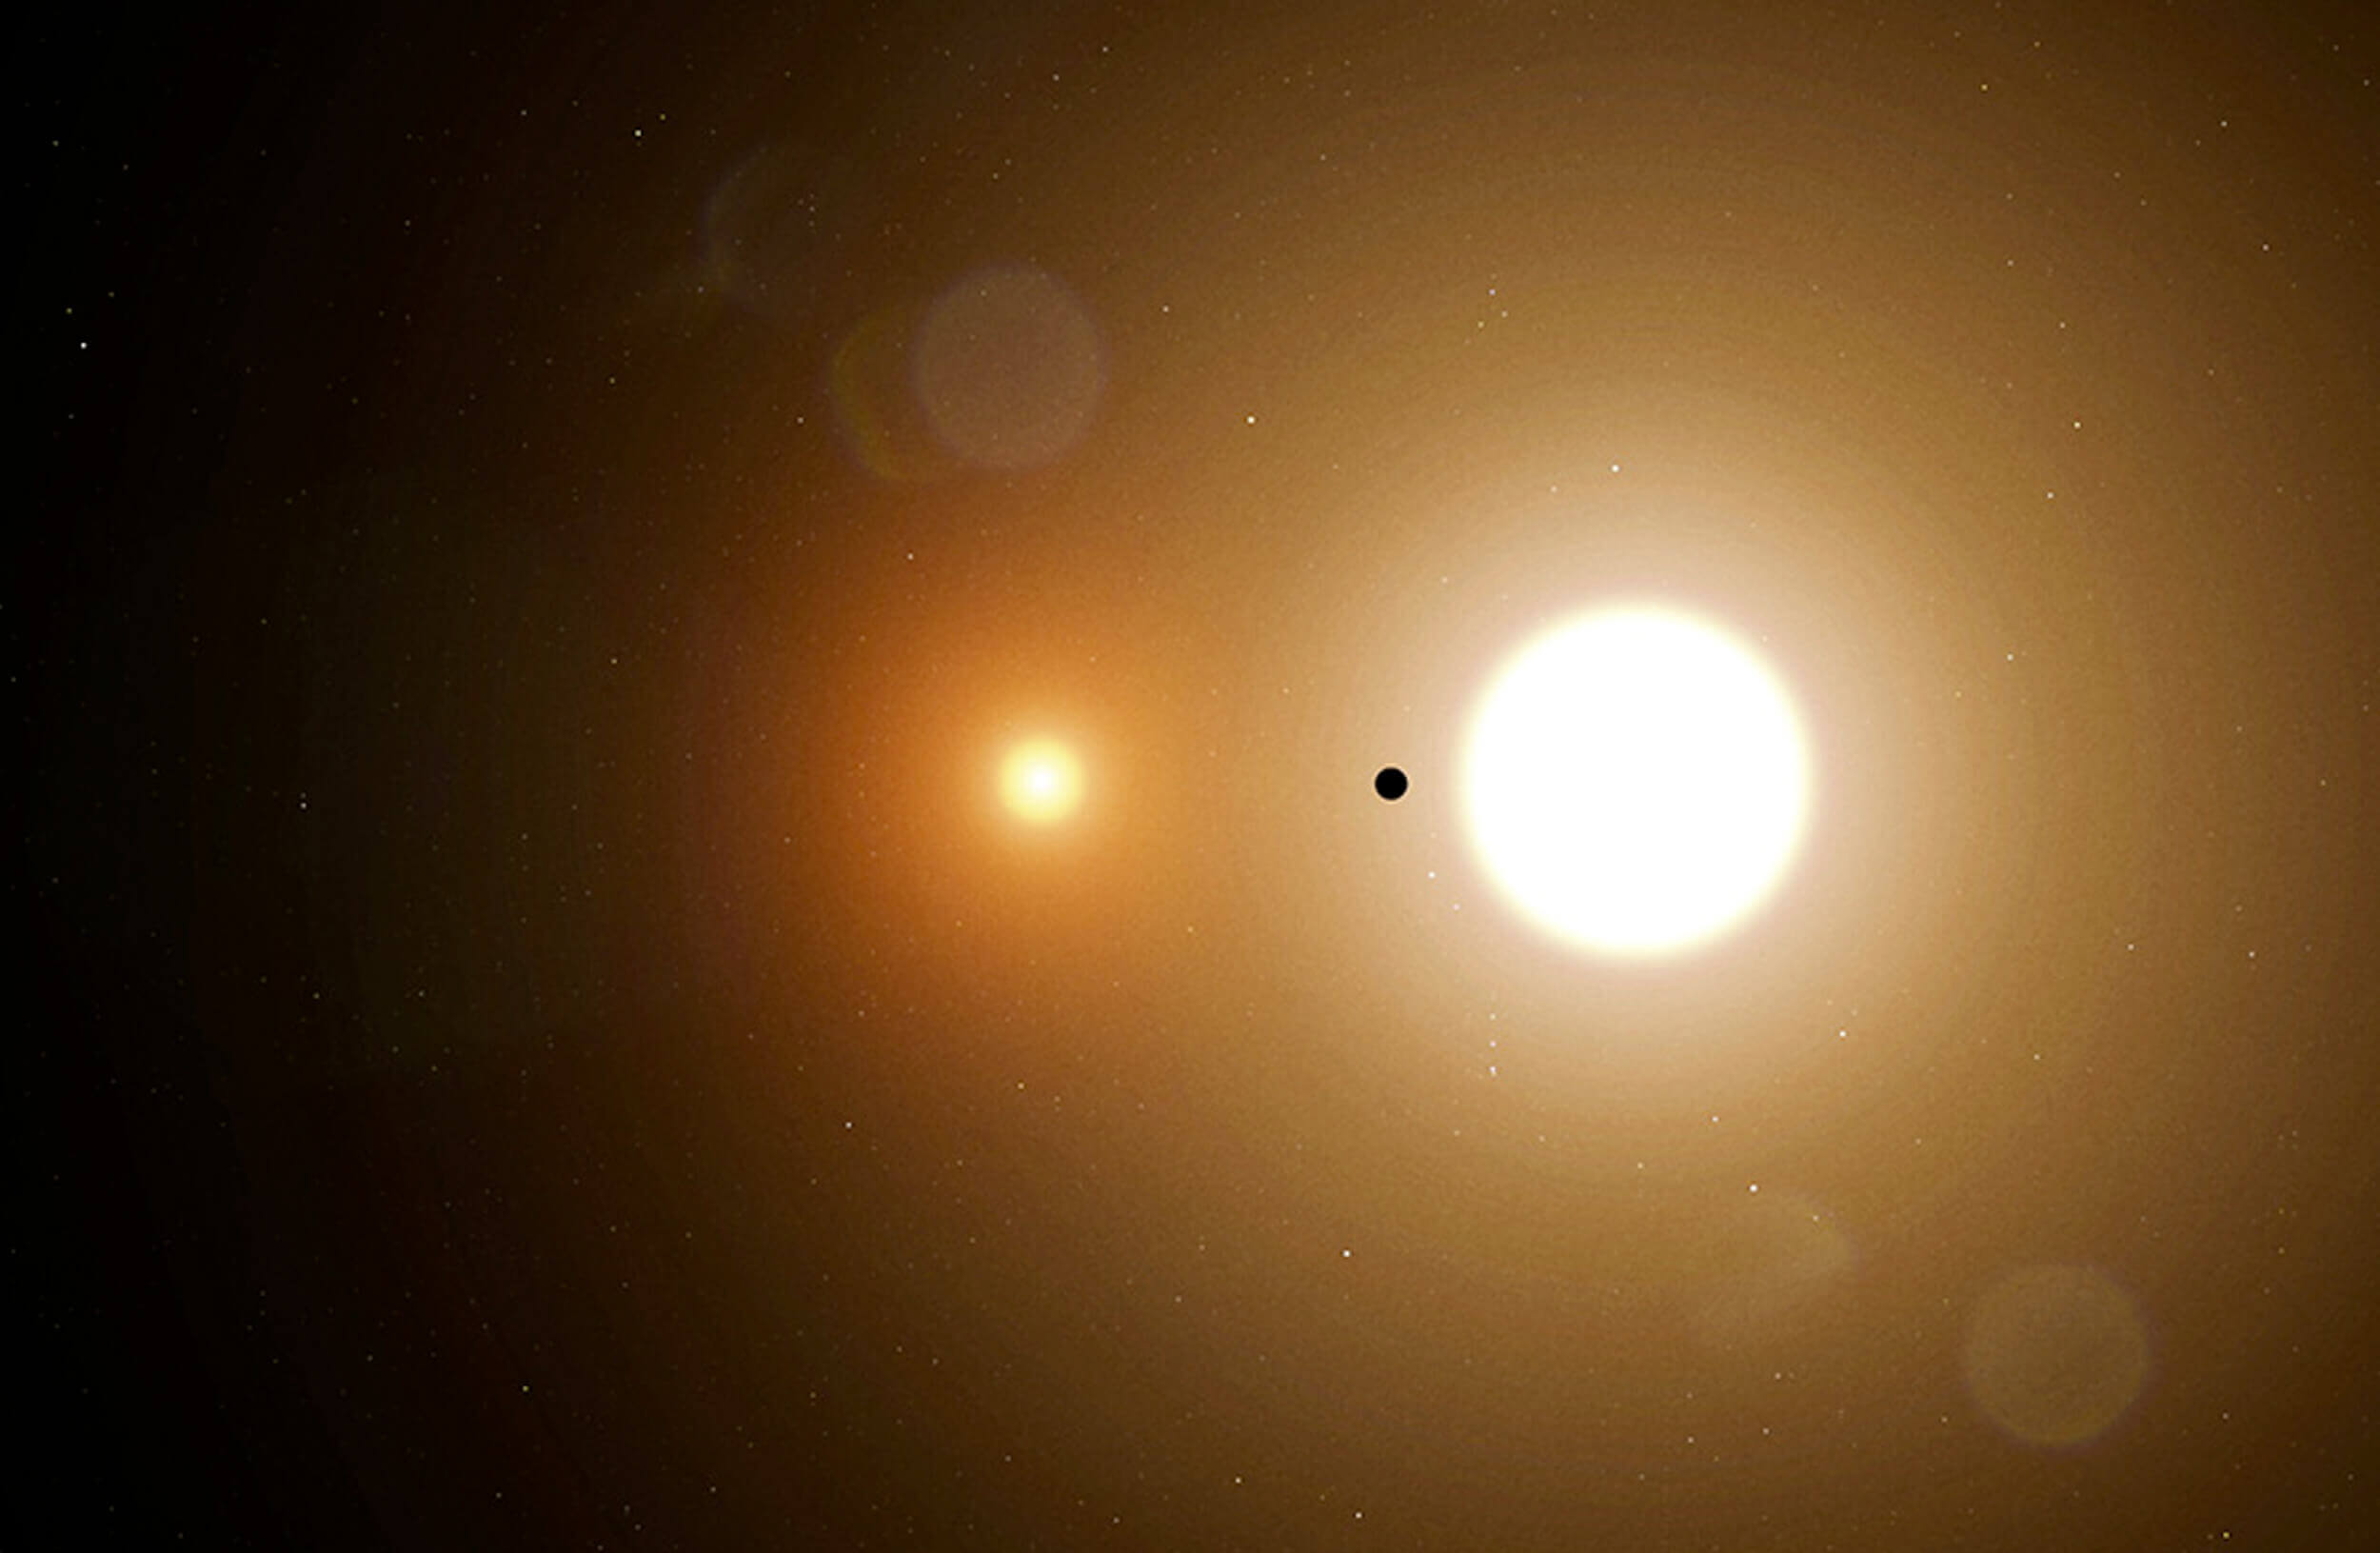 NASA Intern Discovered New Planet With Two Suns on Third Day of Placement